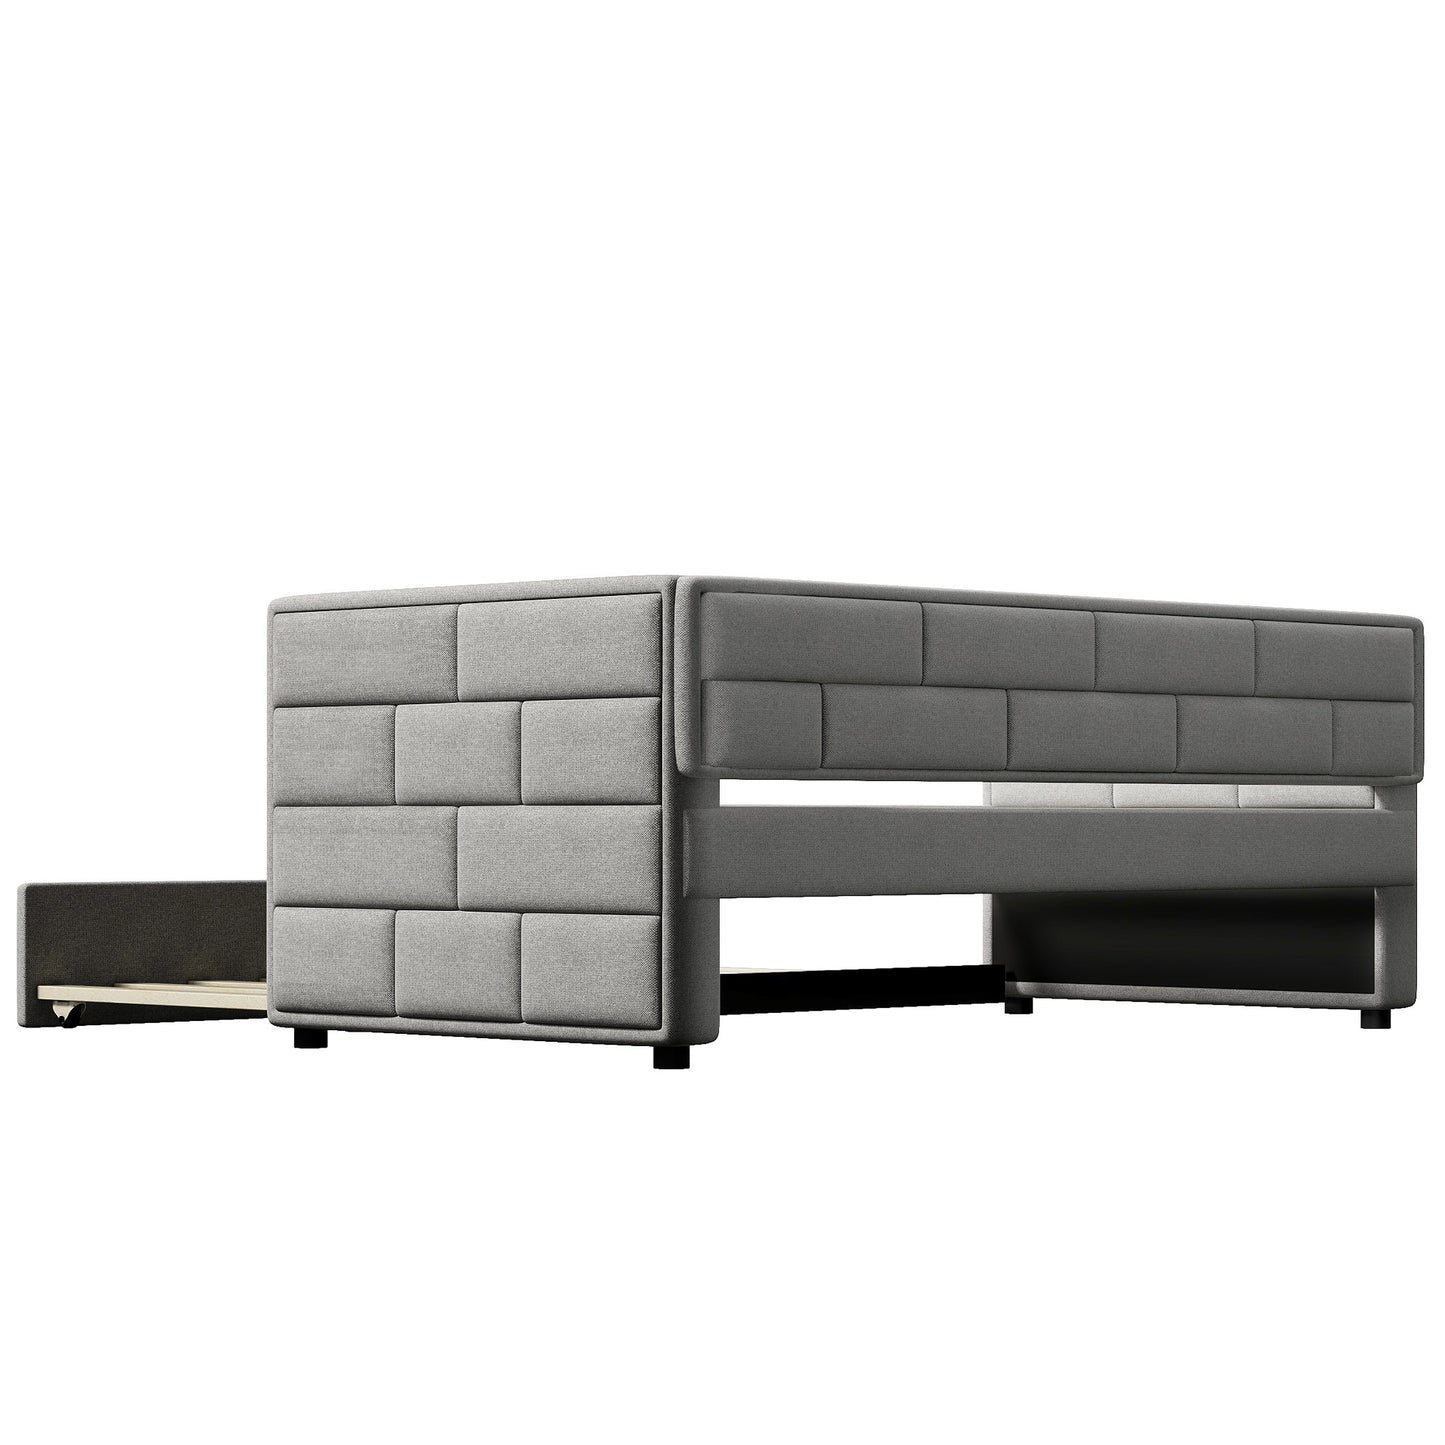 upholstered bed with padded back, gray